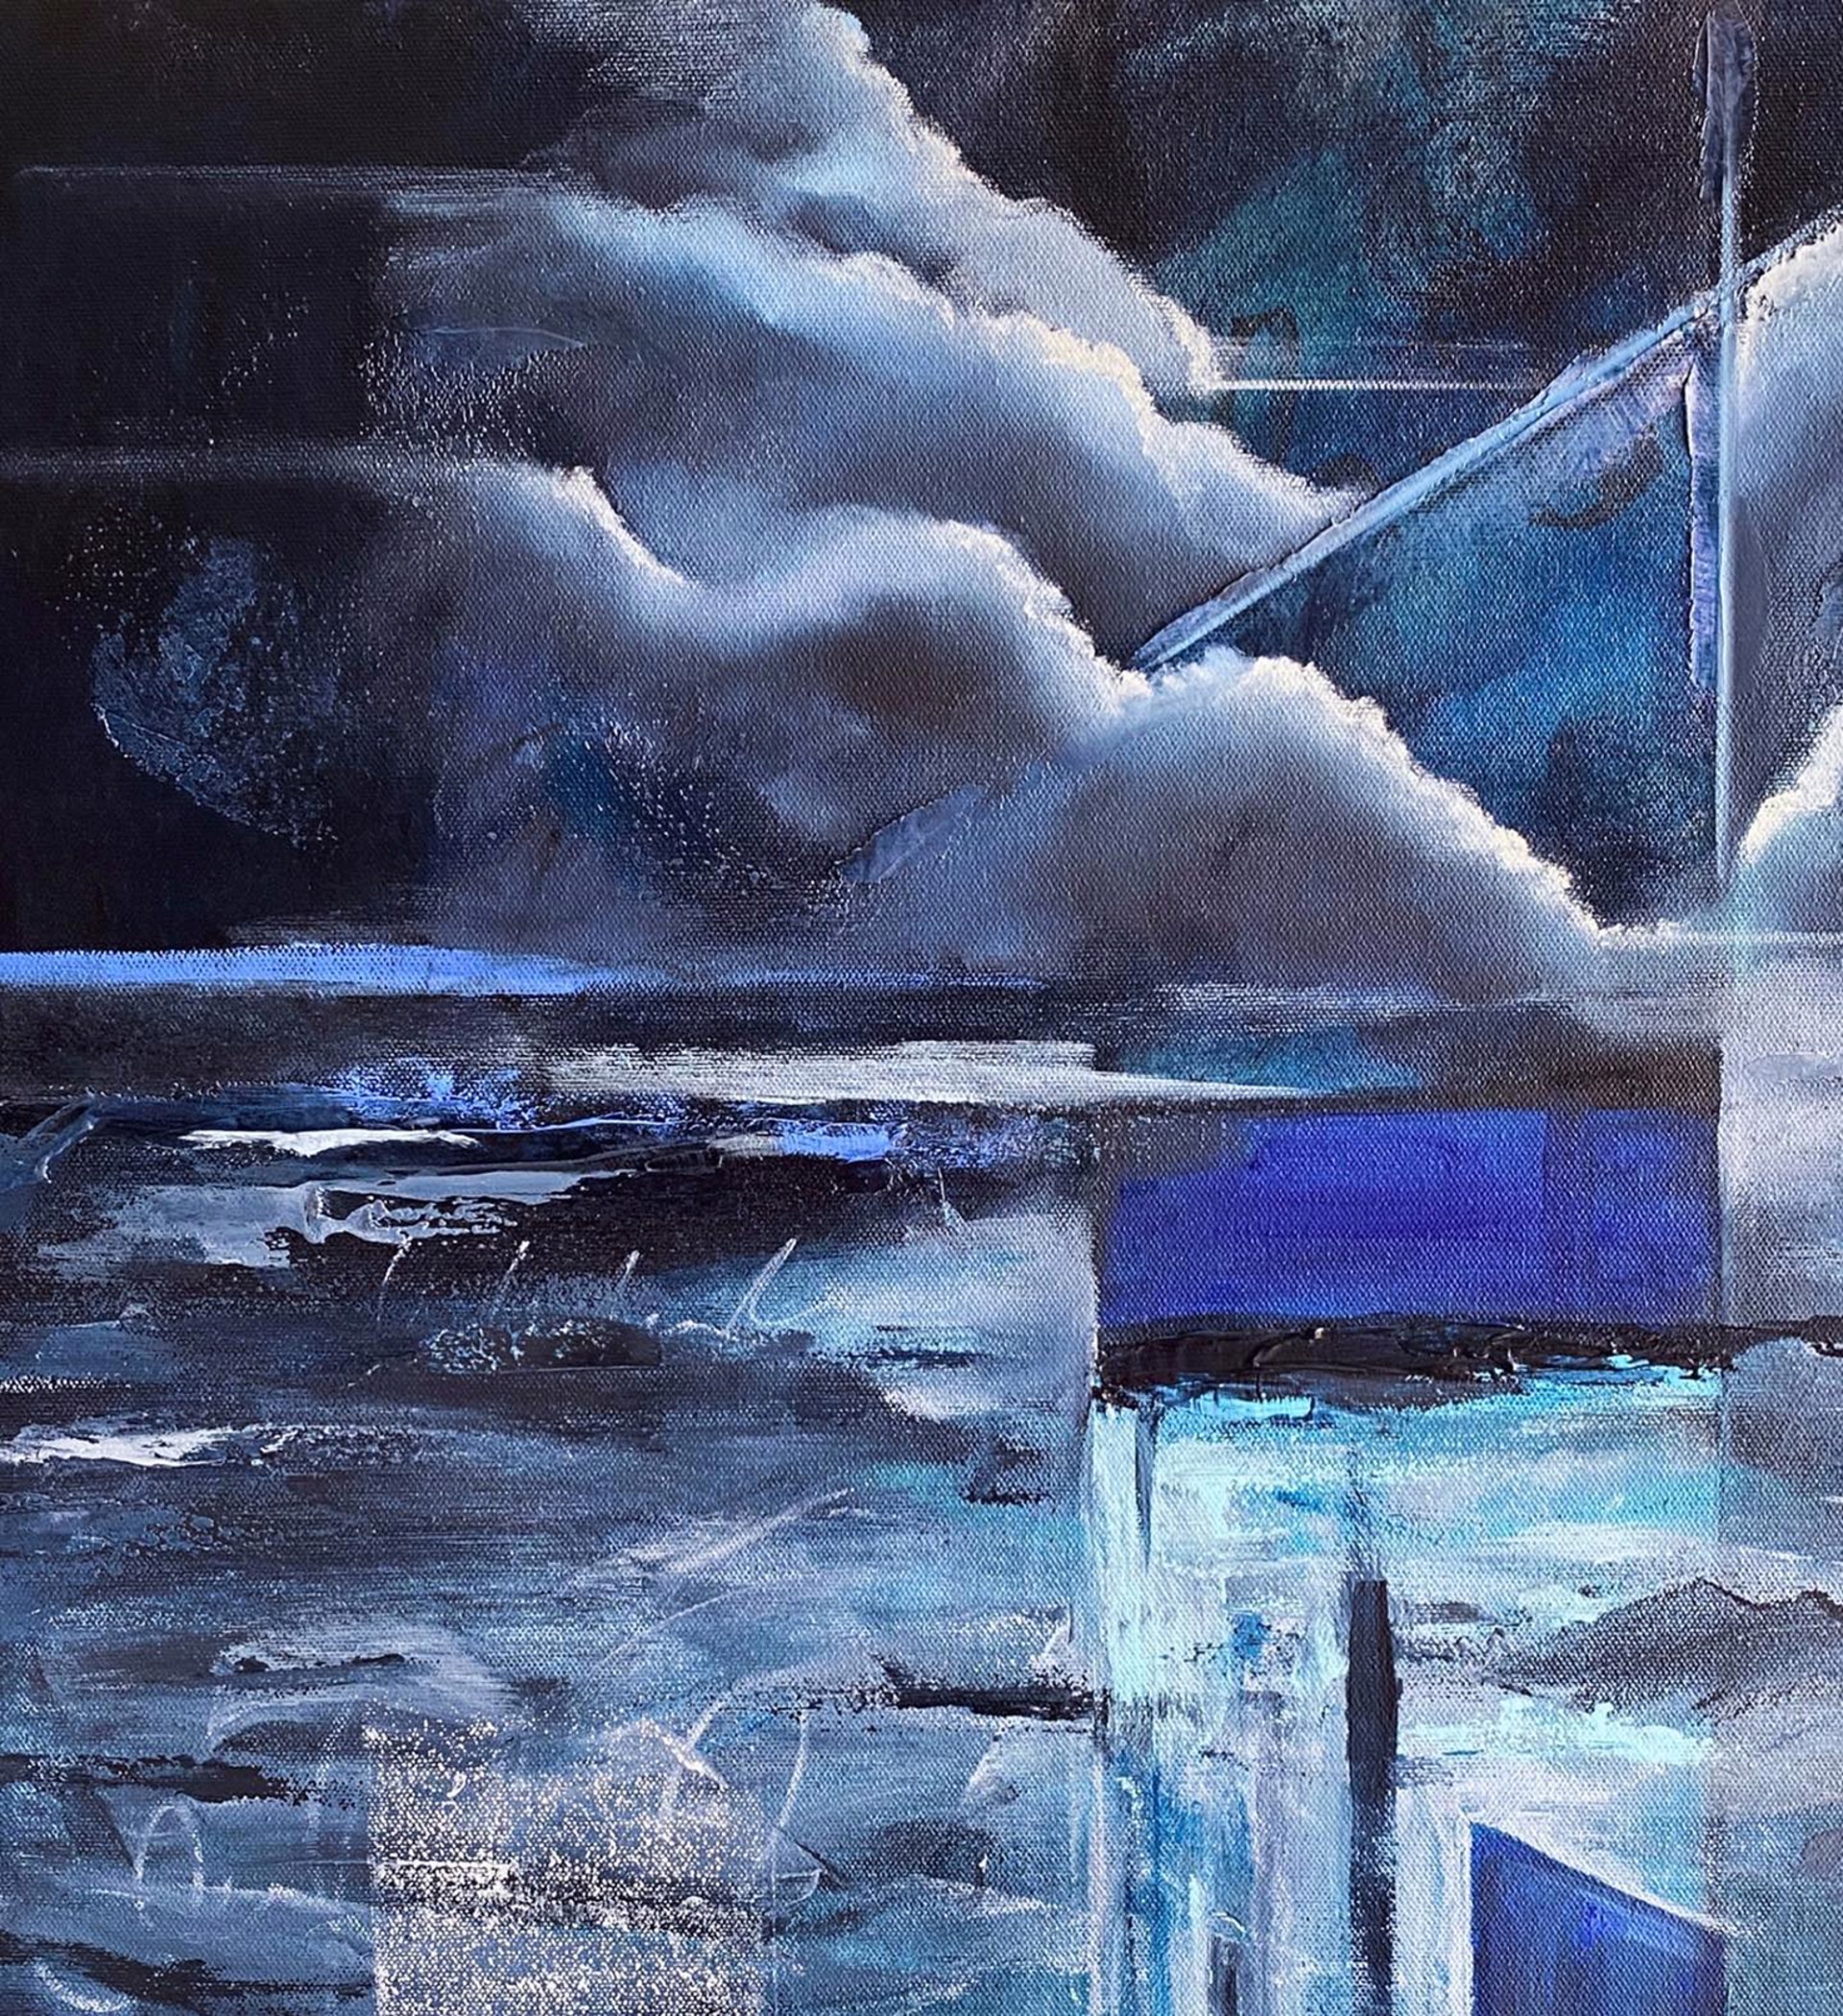 Susan Verekar - Emergence Oil on Canvas Painting - 36x48 - Blue Geometric Abstract water and sky modern painting